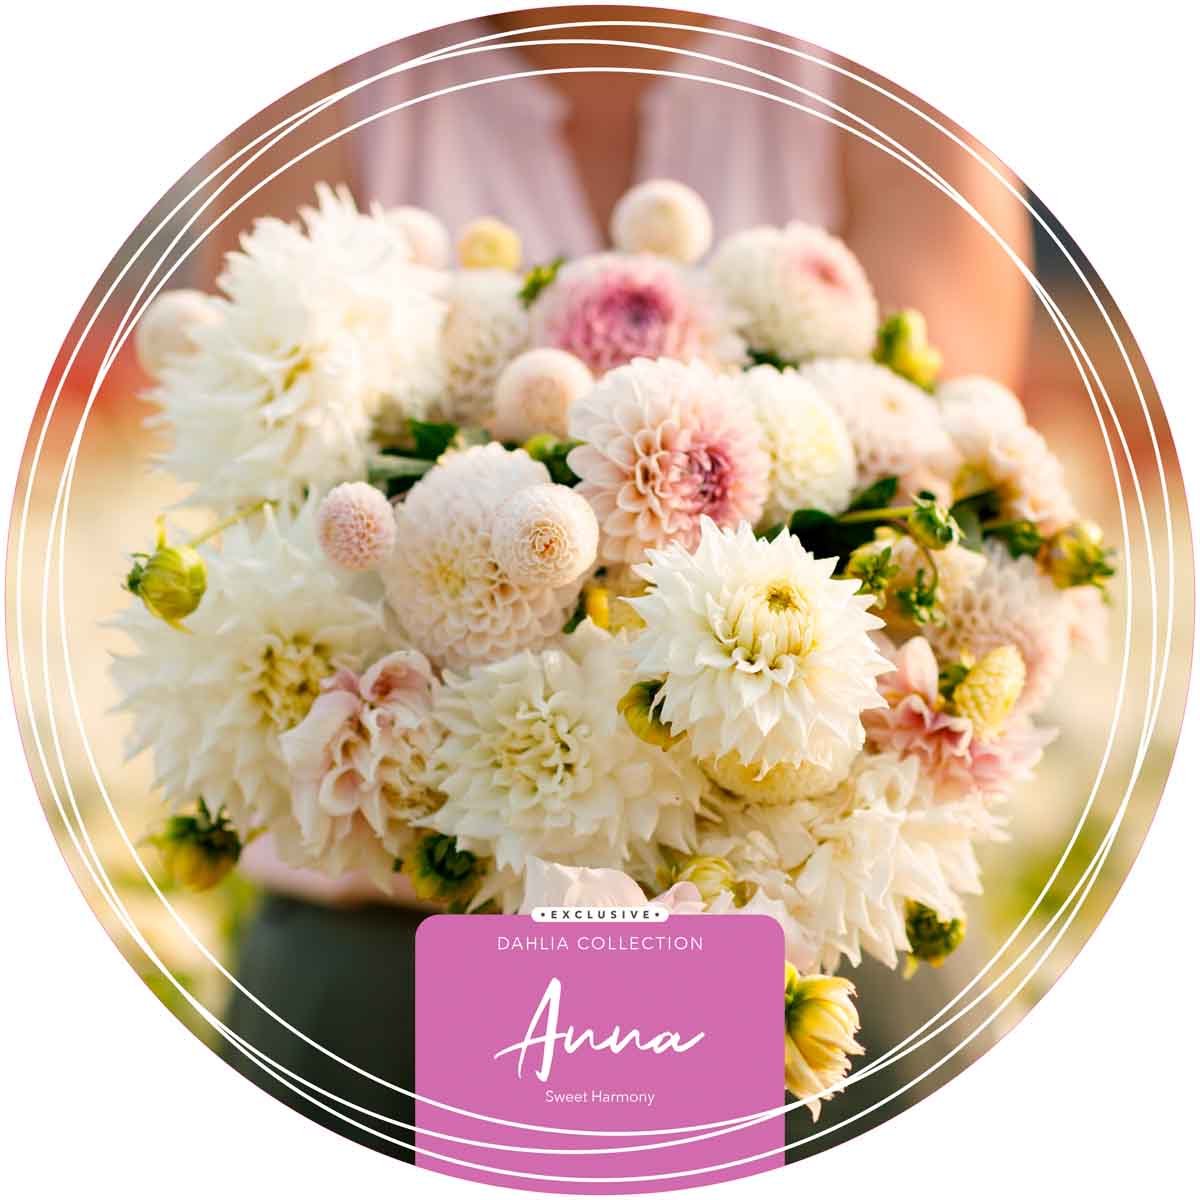 Exclusive Collection Dahlias 'Anna'- Sweet Harmony